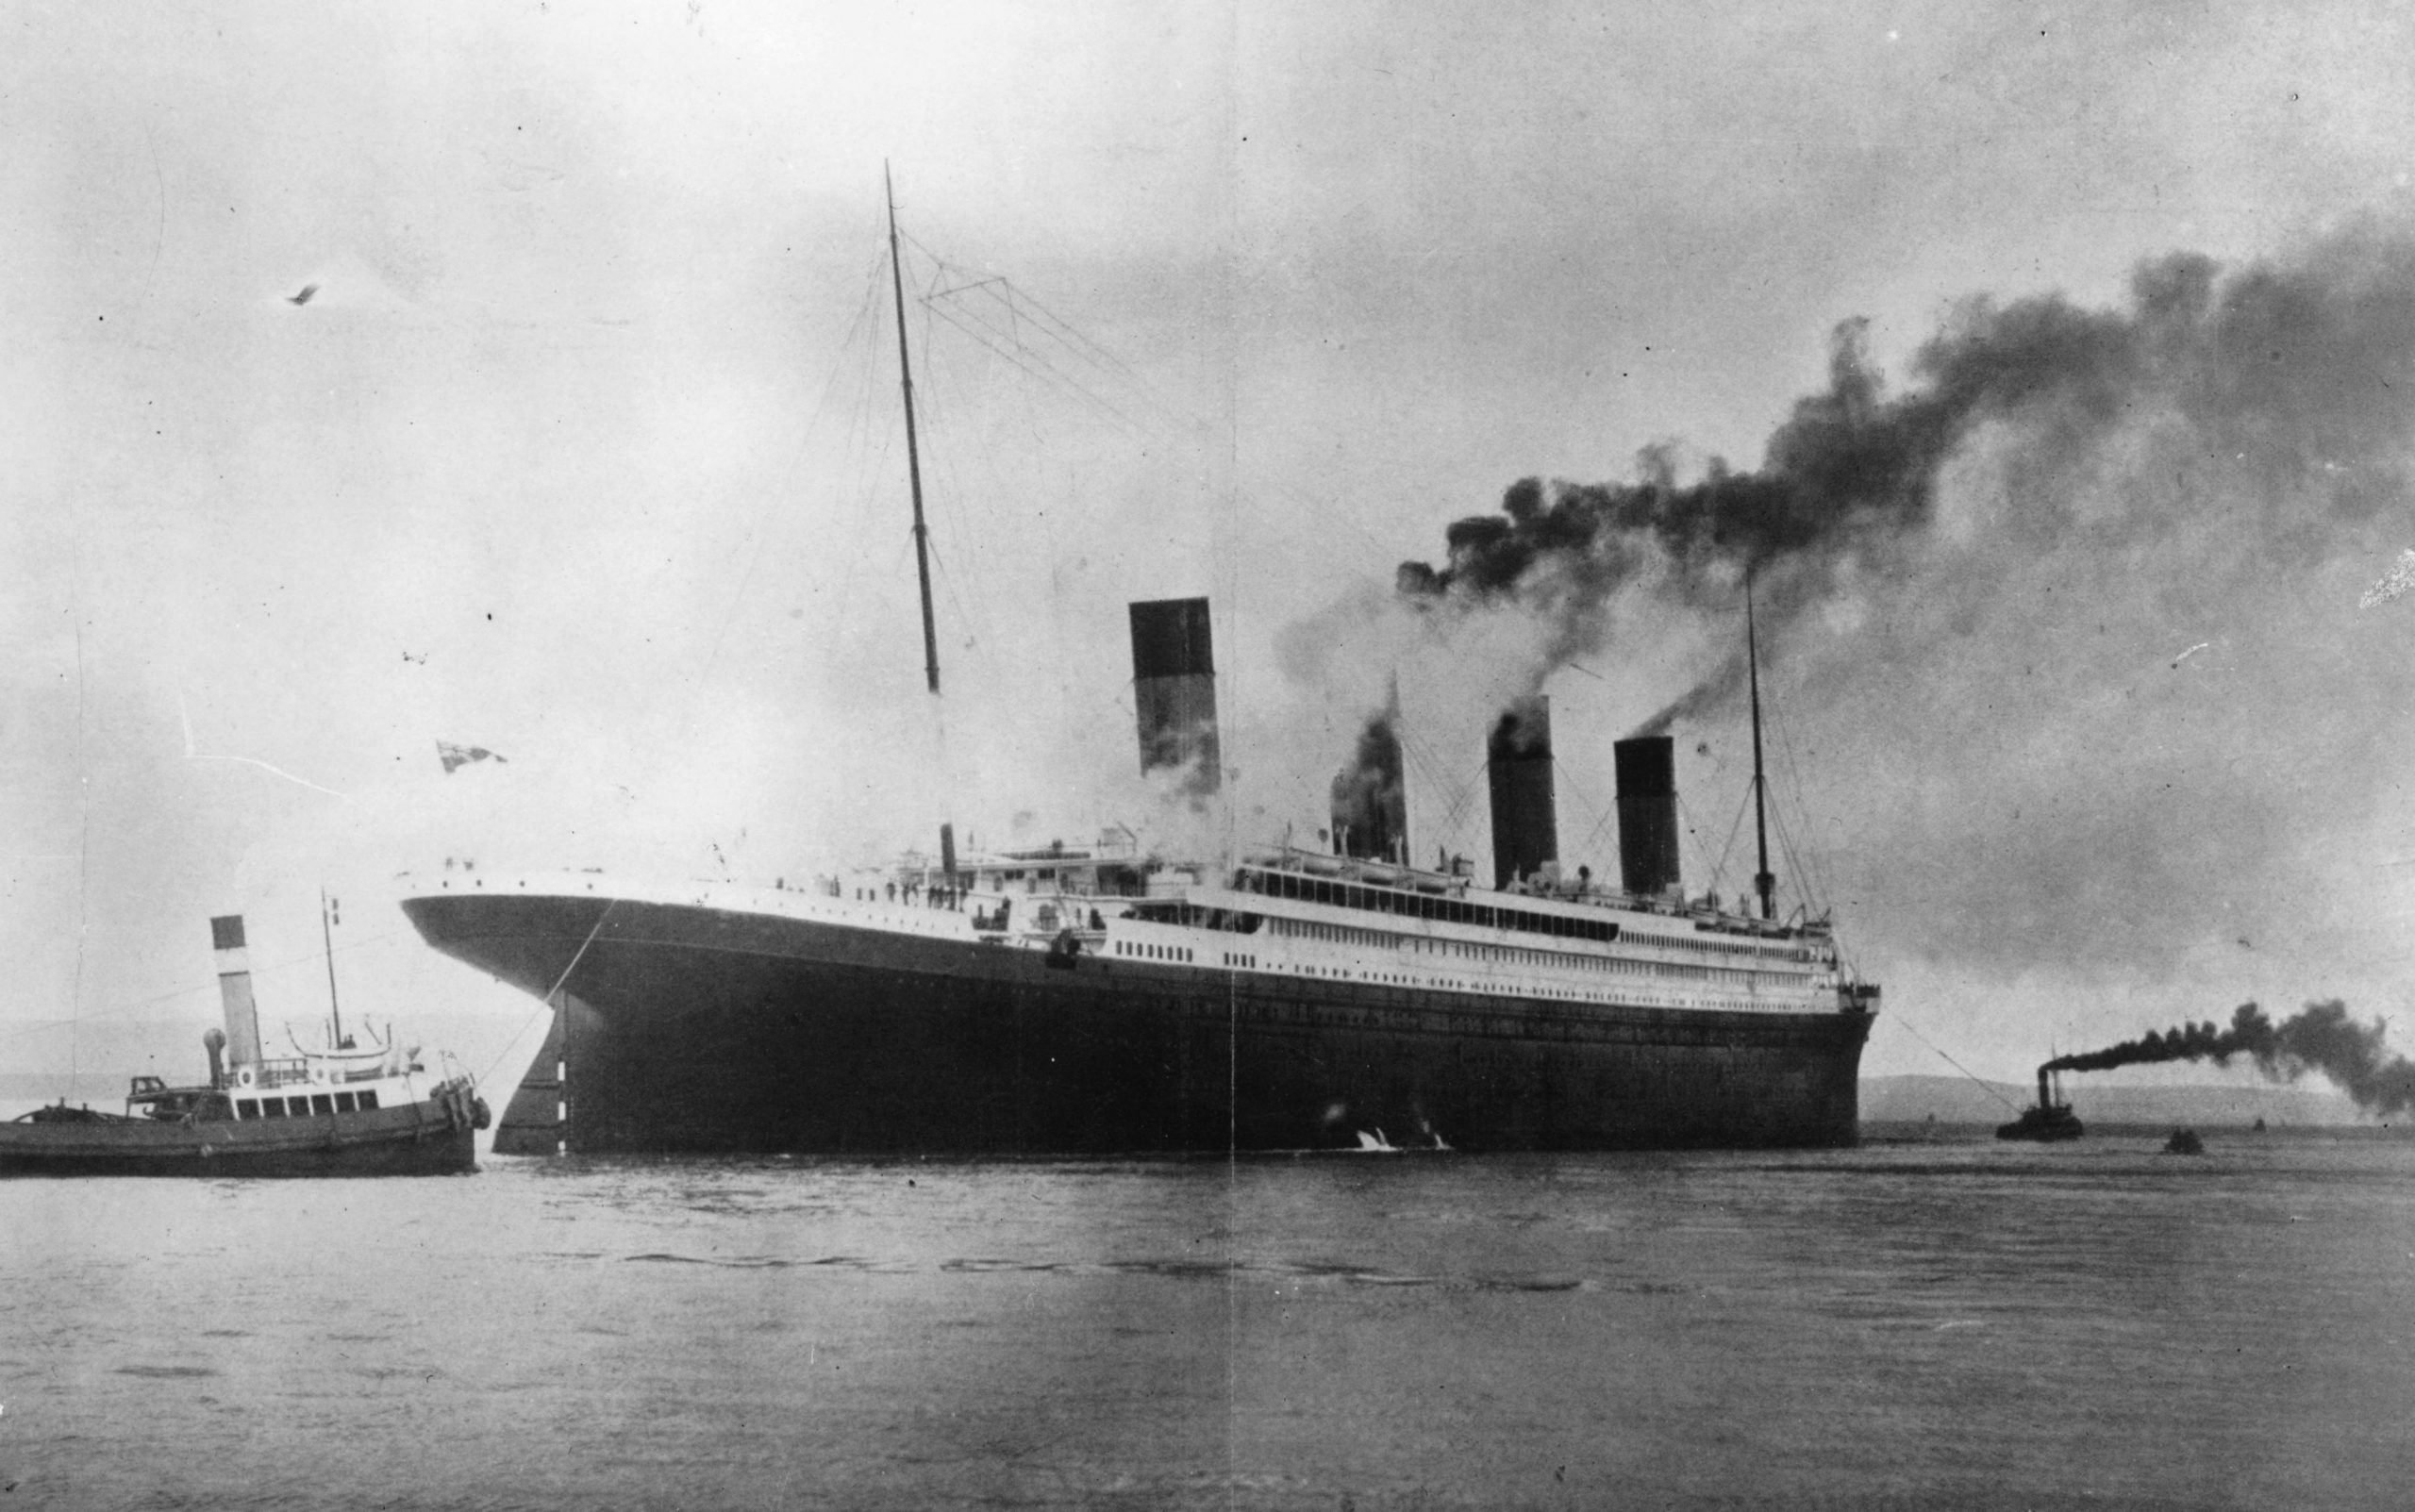 Facts That Often Get Overlooked About the Titanic | Reader's Digest